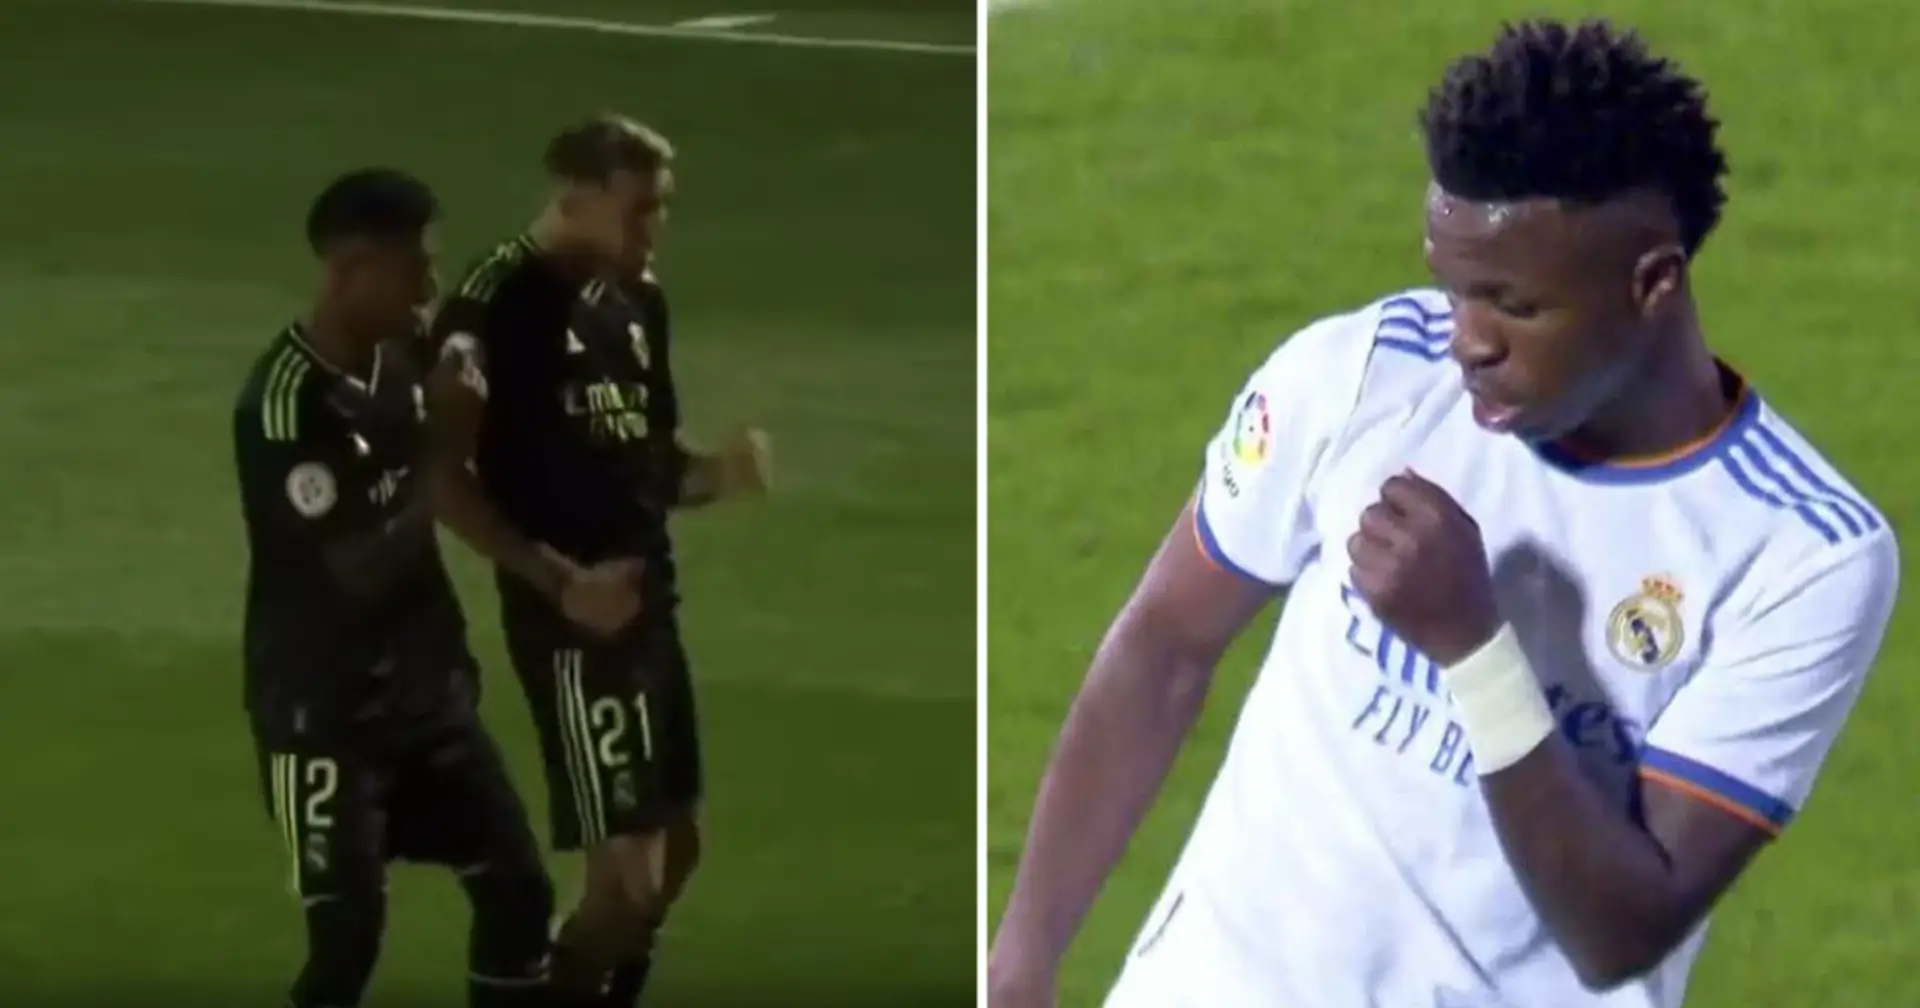 Academy players show support for VInicius Jr with special goal celebration